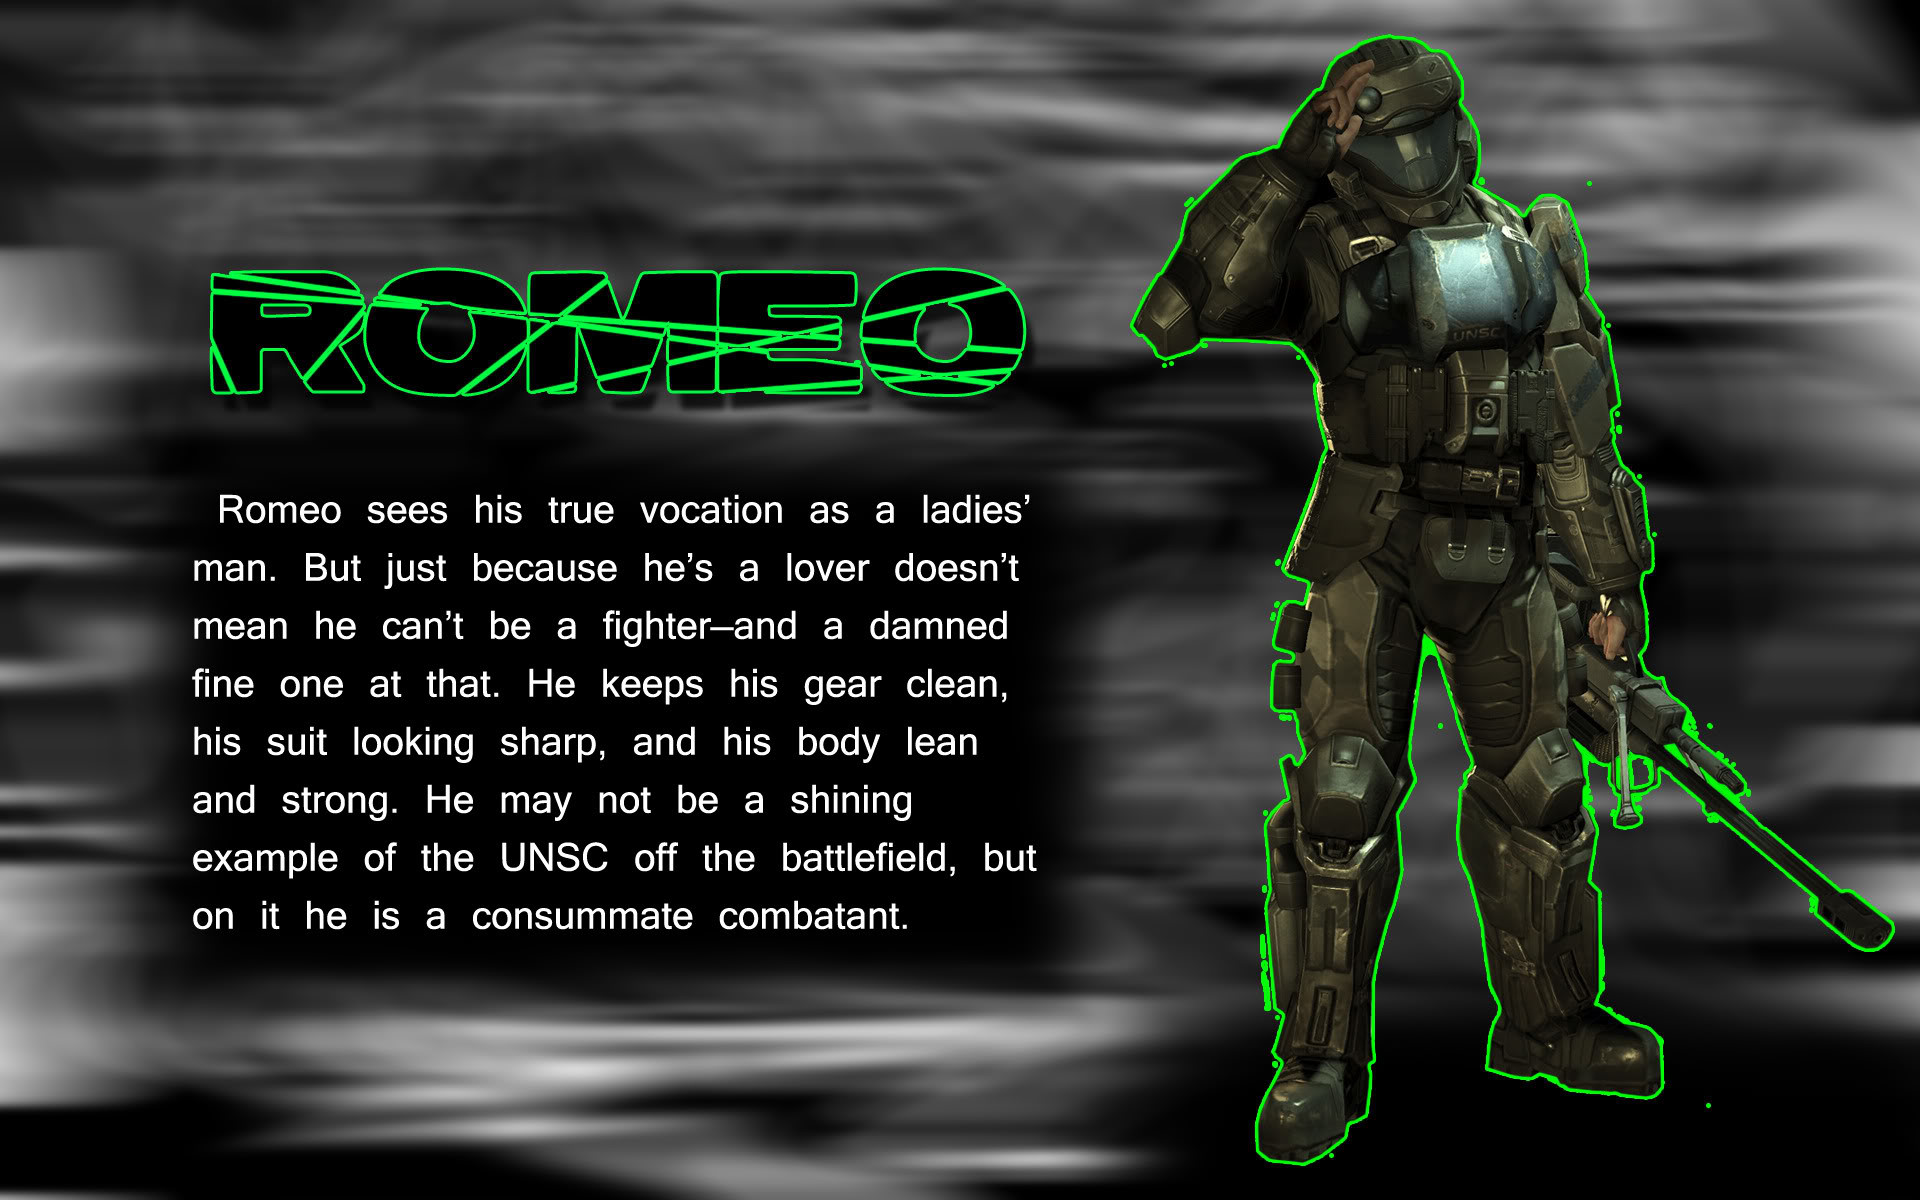 1920x1200 I was bored tonight with nothing to do so I made some wallpaper/bios. I  used info from the ODST projects page. I hope you all like it.